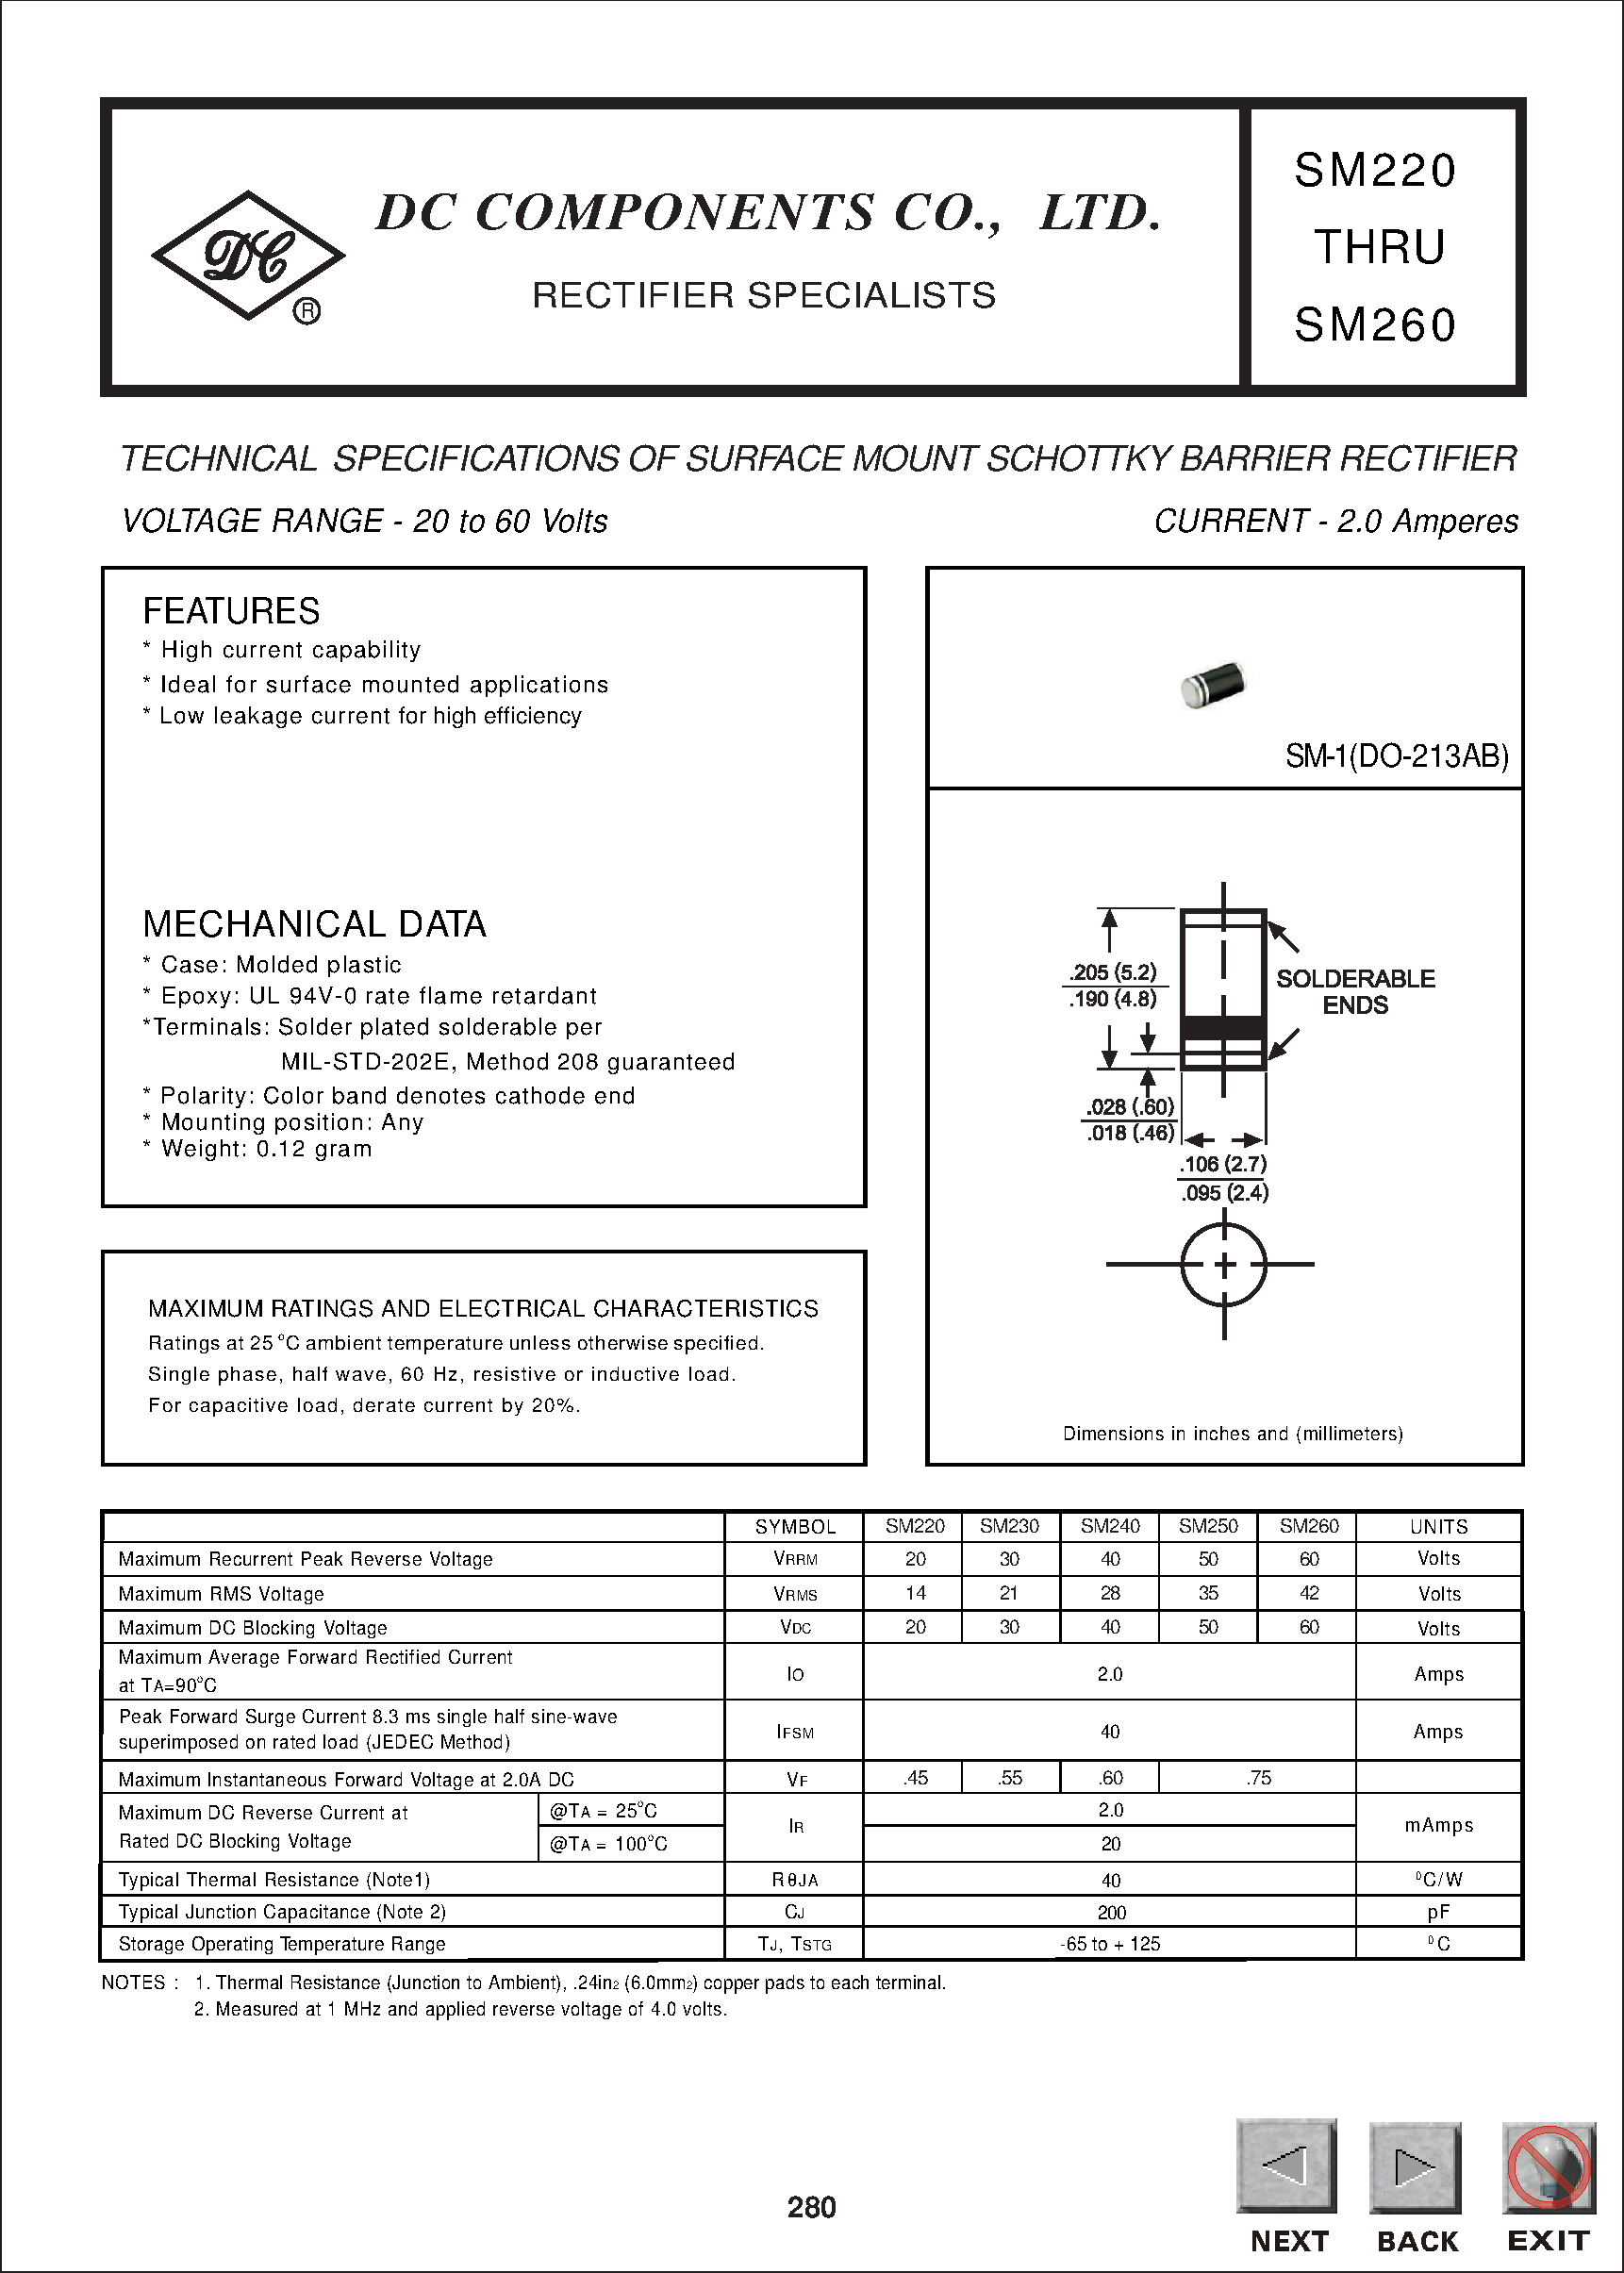 Datasheet SM250 - TECHNICAL SPECIFICATIONS OF SURFACE MOUNT SCHOTTKY BARRIER RECTIFIER page 1